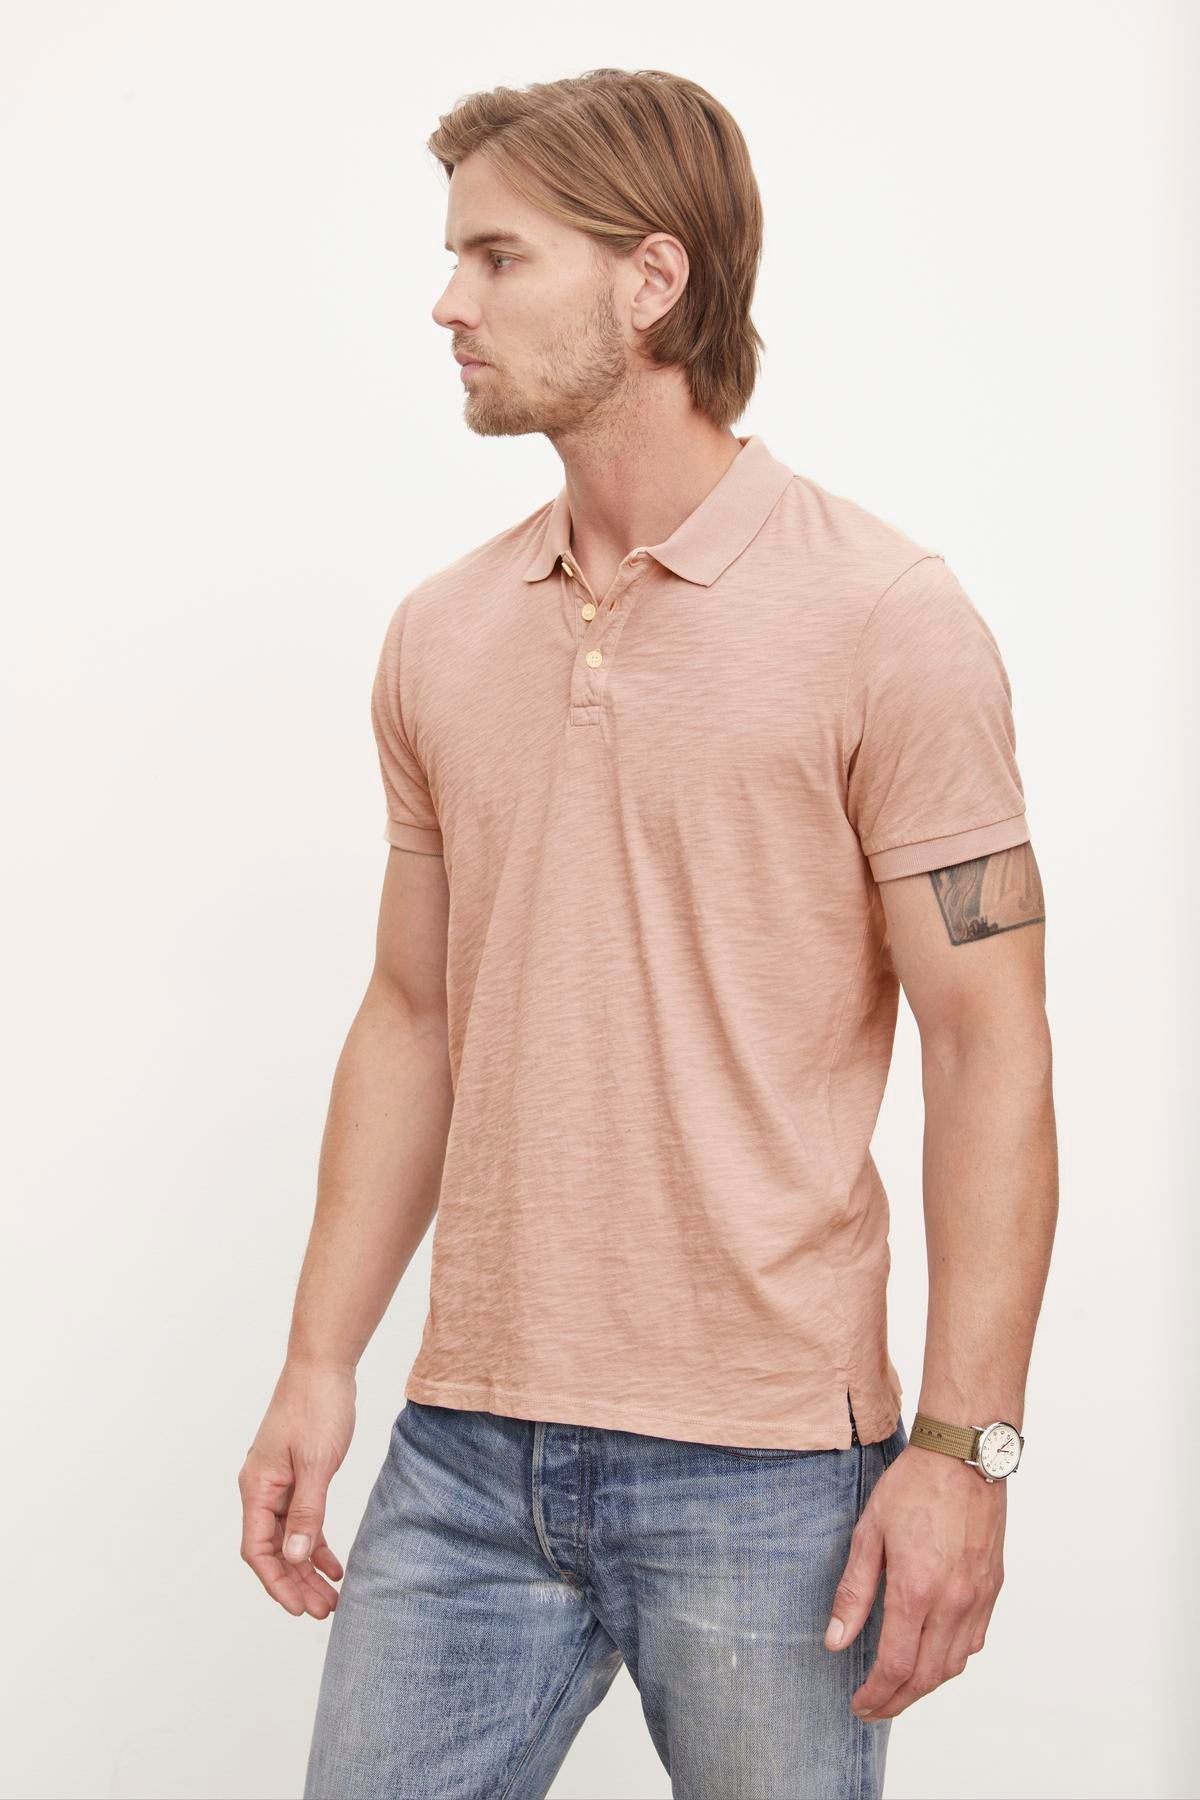 A man in a Velvet by Graham & Spencer NIKO POLO polo shirt with a heathered texture and blue jeans stands in profile, looking to the side, with a tattoo on his left arm and wearing a wristwatch.-36890746716353